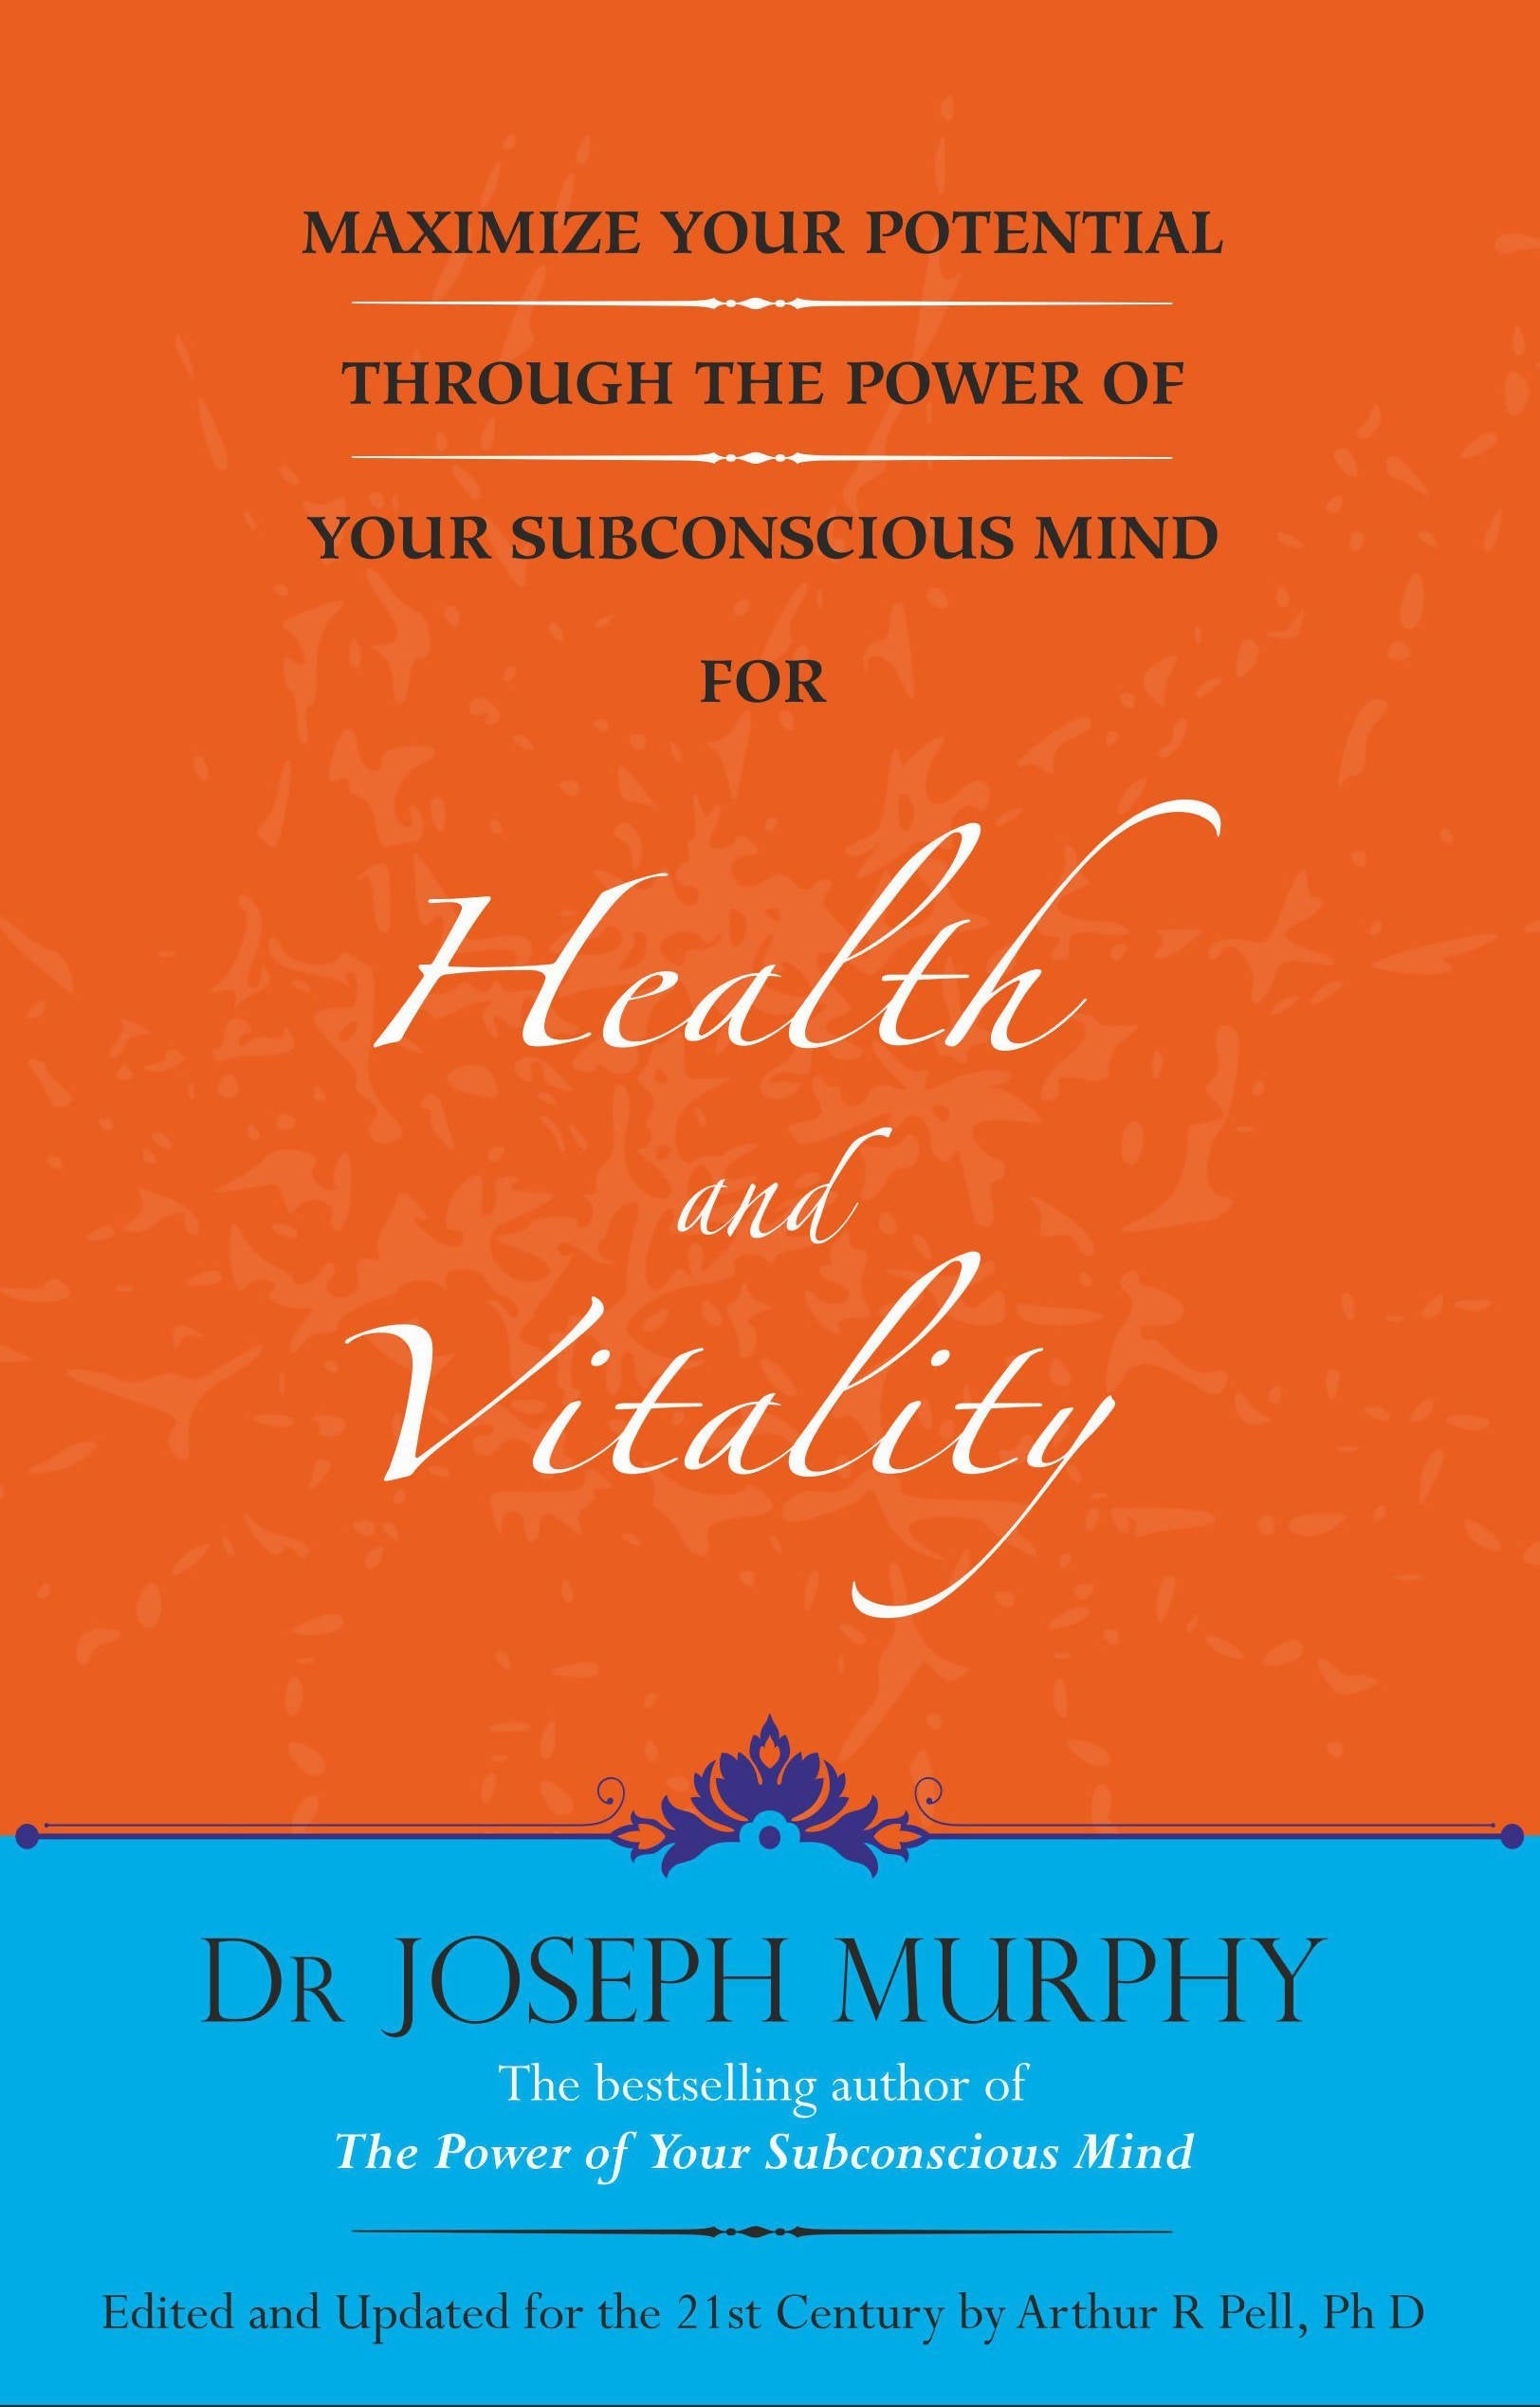 Maximize Your Potential Through The Power Of Your Subconscious Mind For Health And Vitality